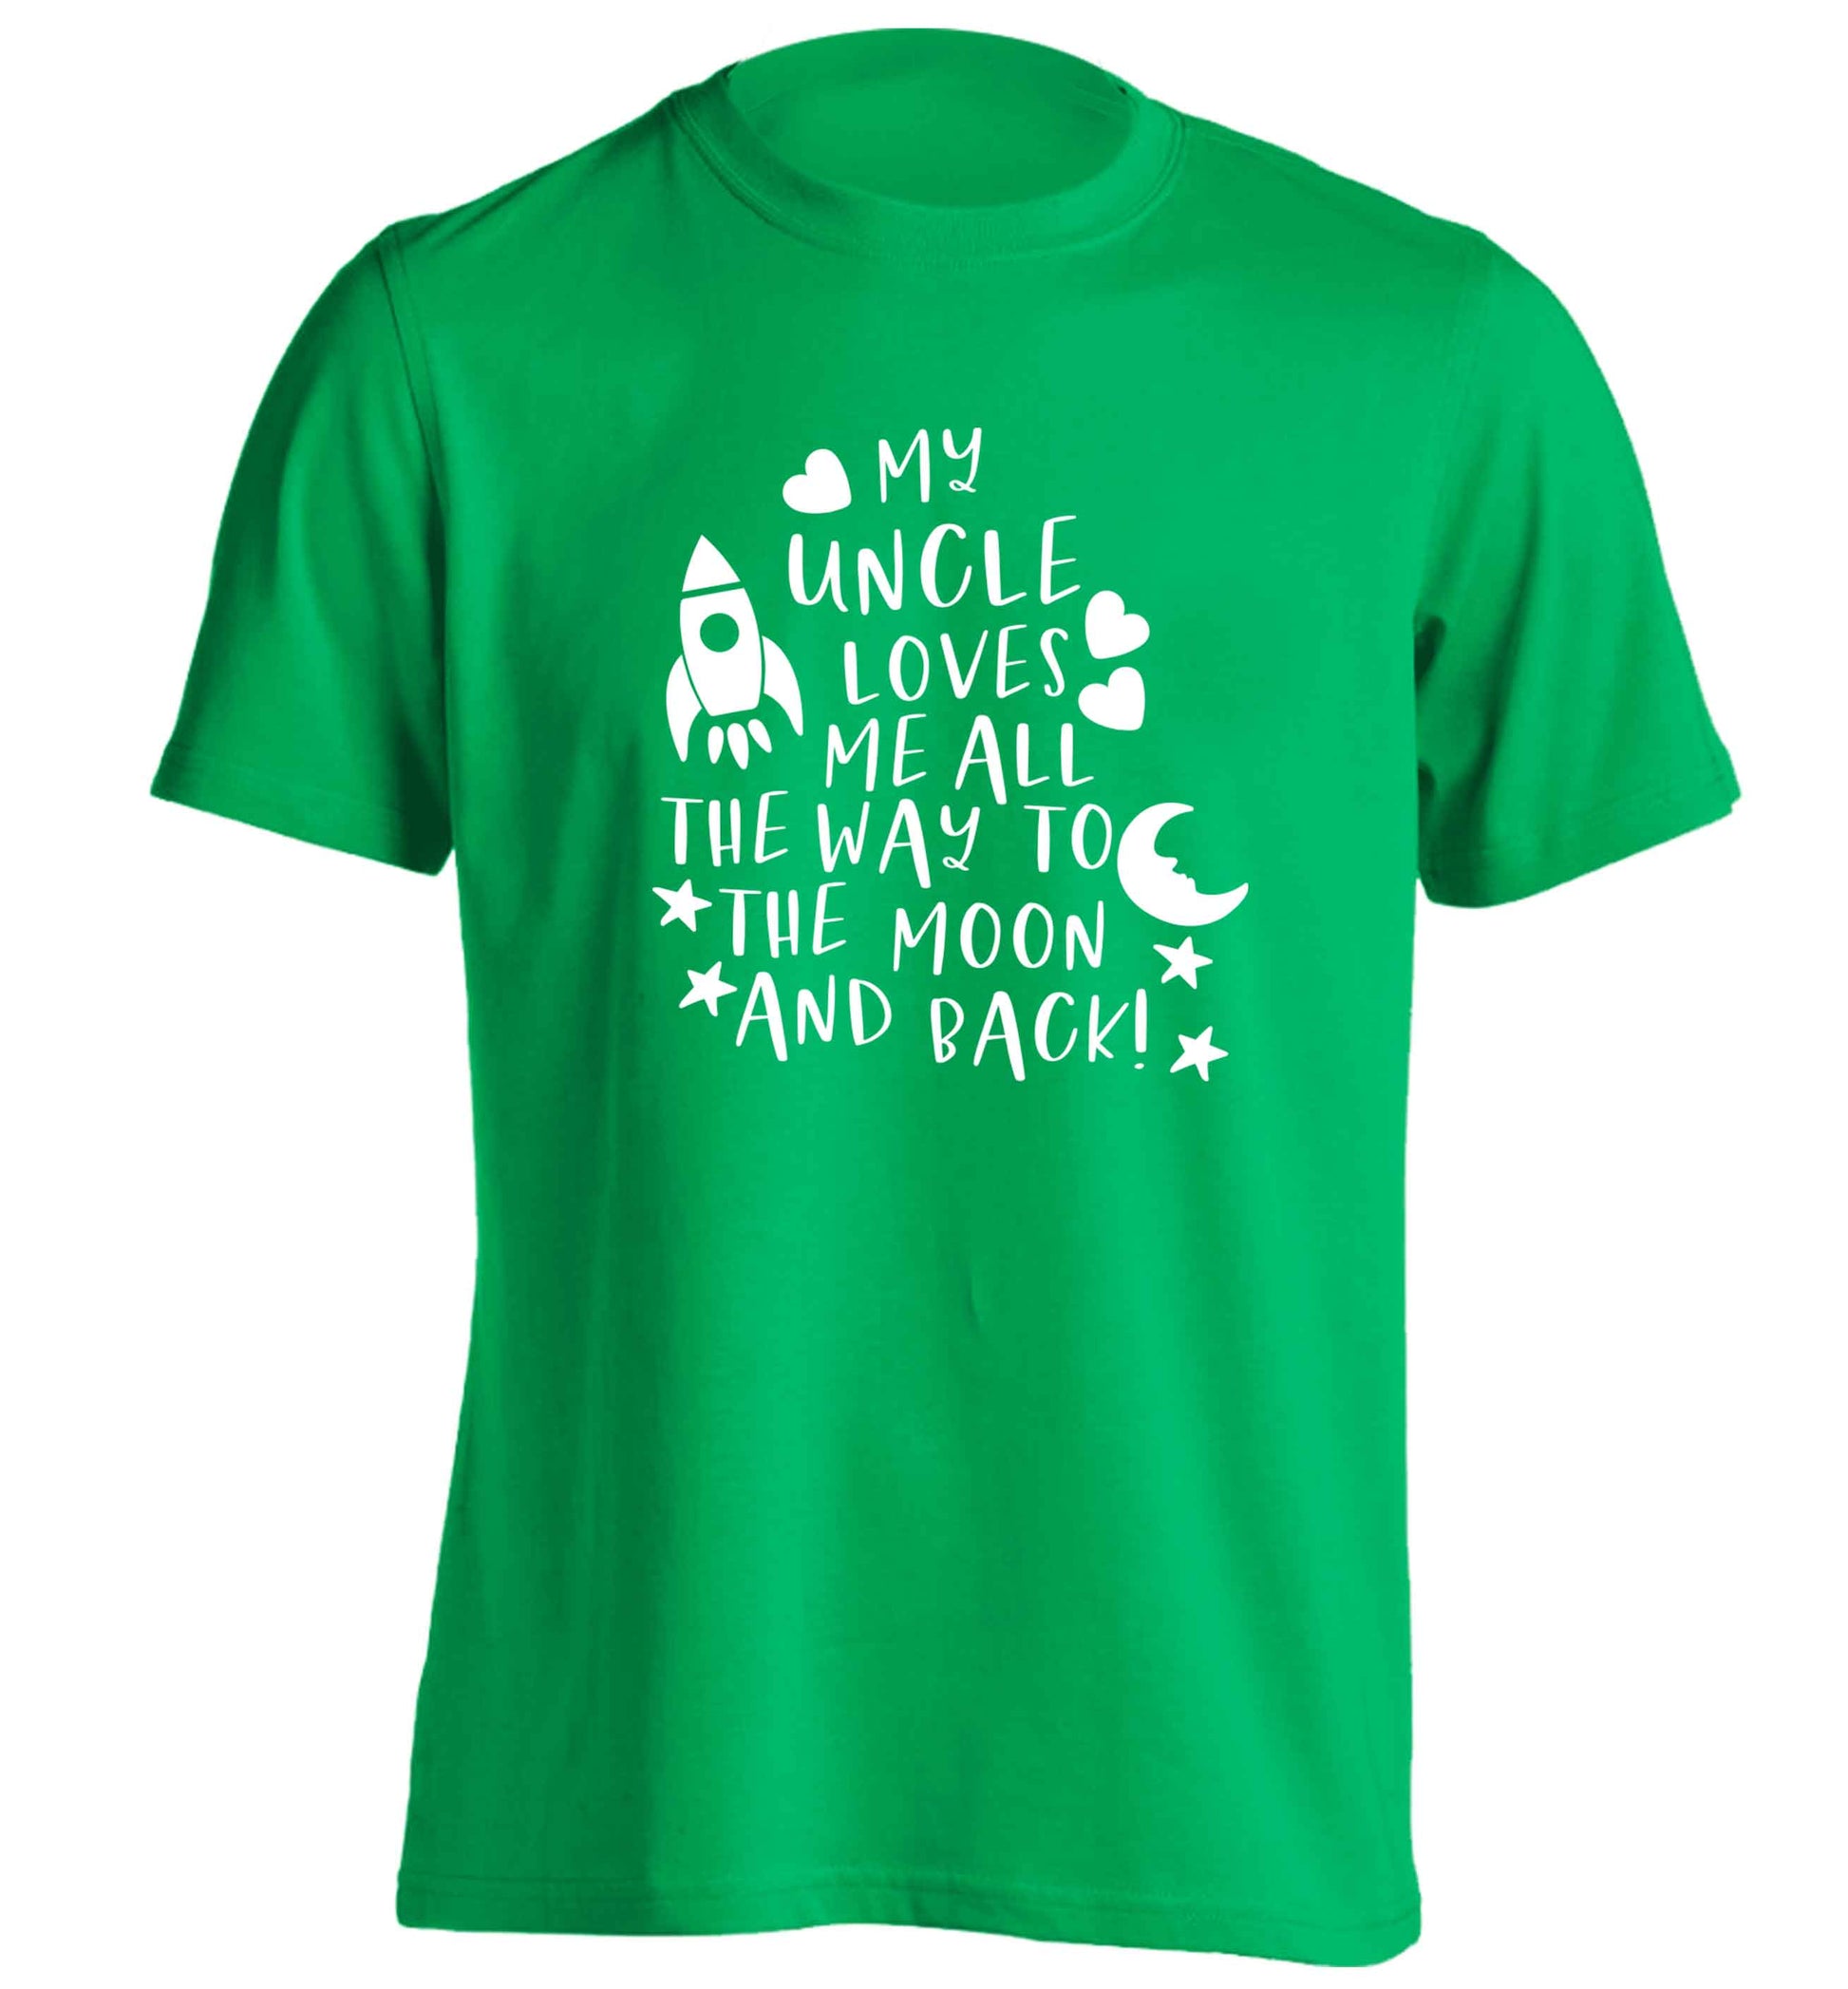 My uncle loves me all the way to the moon and back adults unisex green Tshirt 2XL